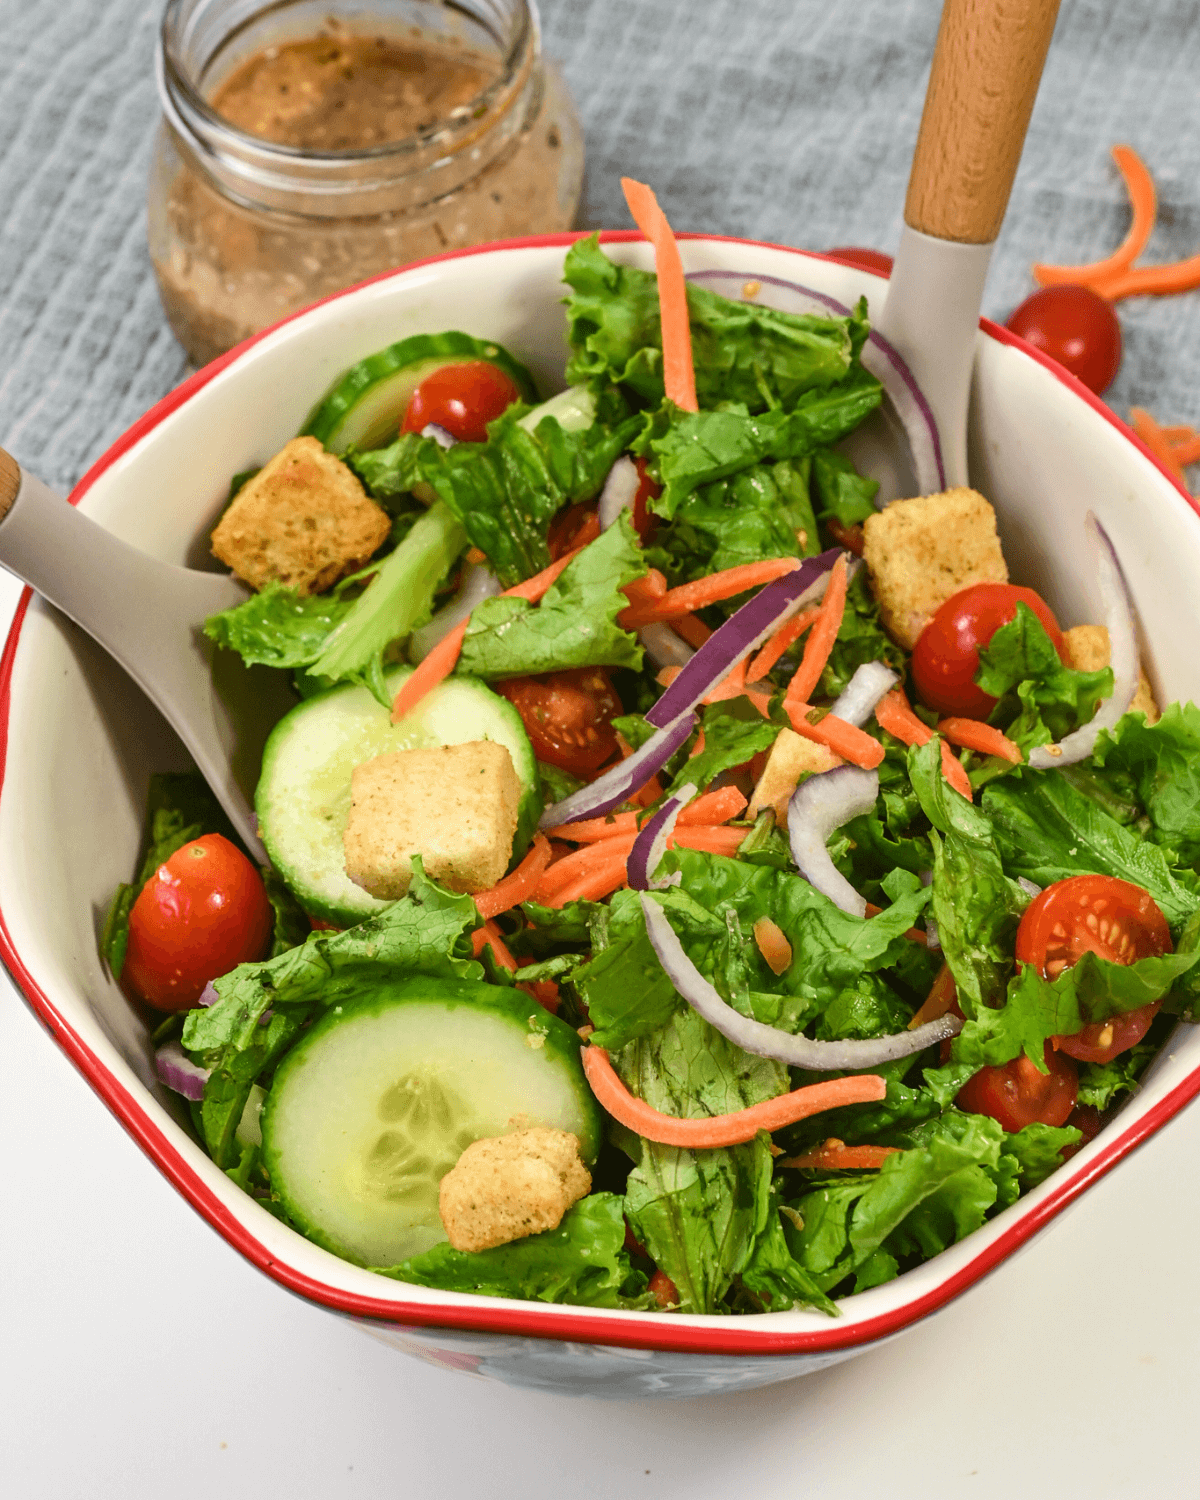 A bowl of fresh house salad with lettuce, cherry tomatoes, shredded carrots, cucumbers, red onion, and croutons, served with a side of creamy balsamic dressing.